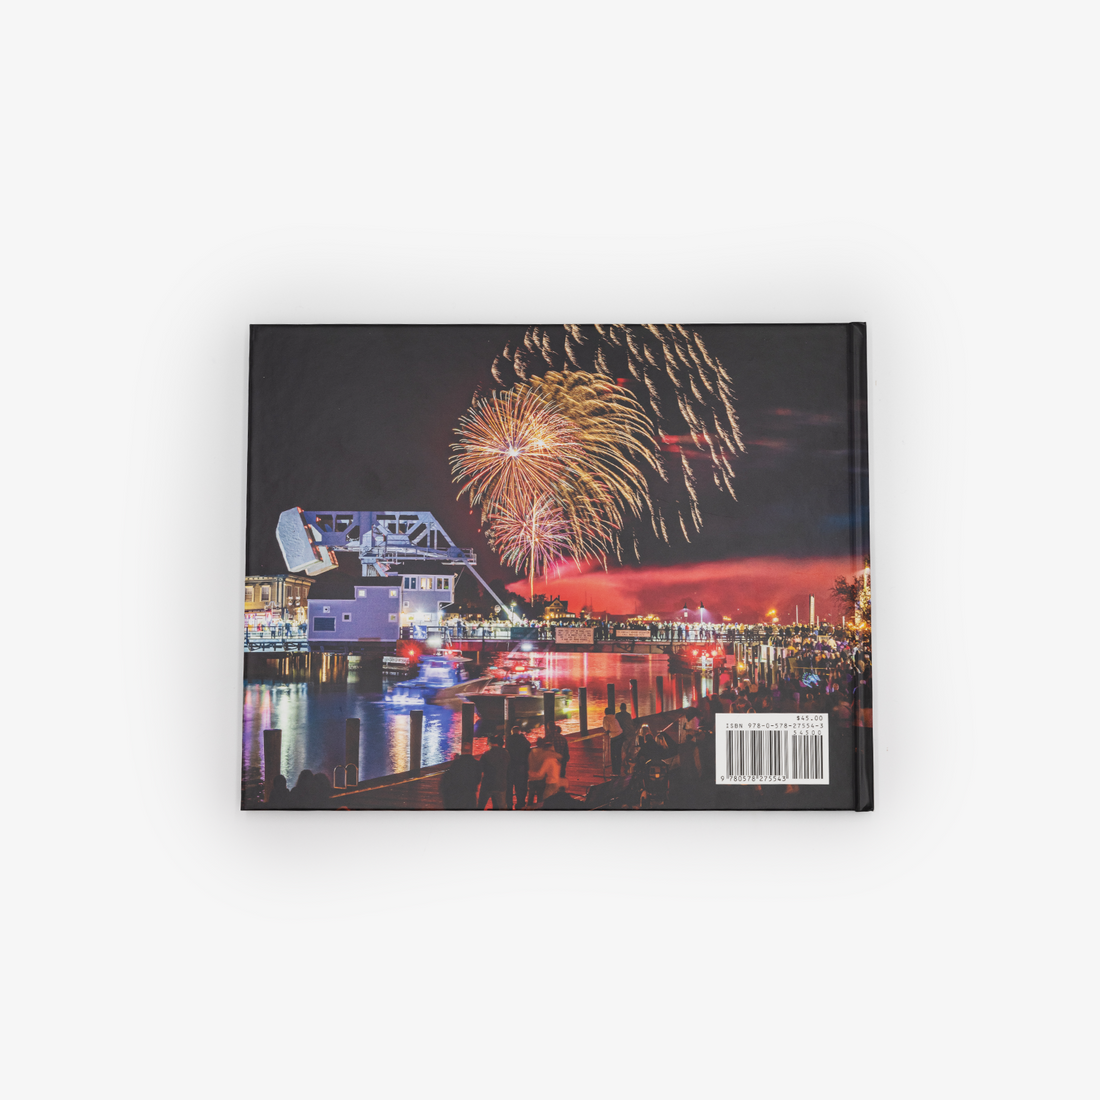 Chamber Mystic Fireworks Puzzle